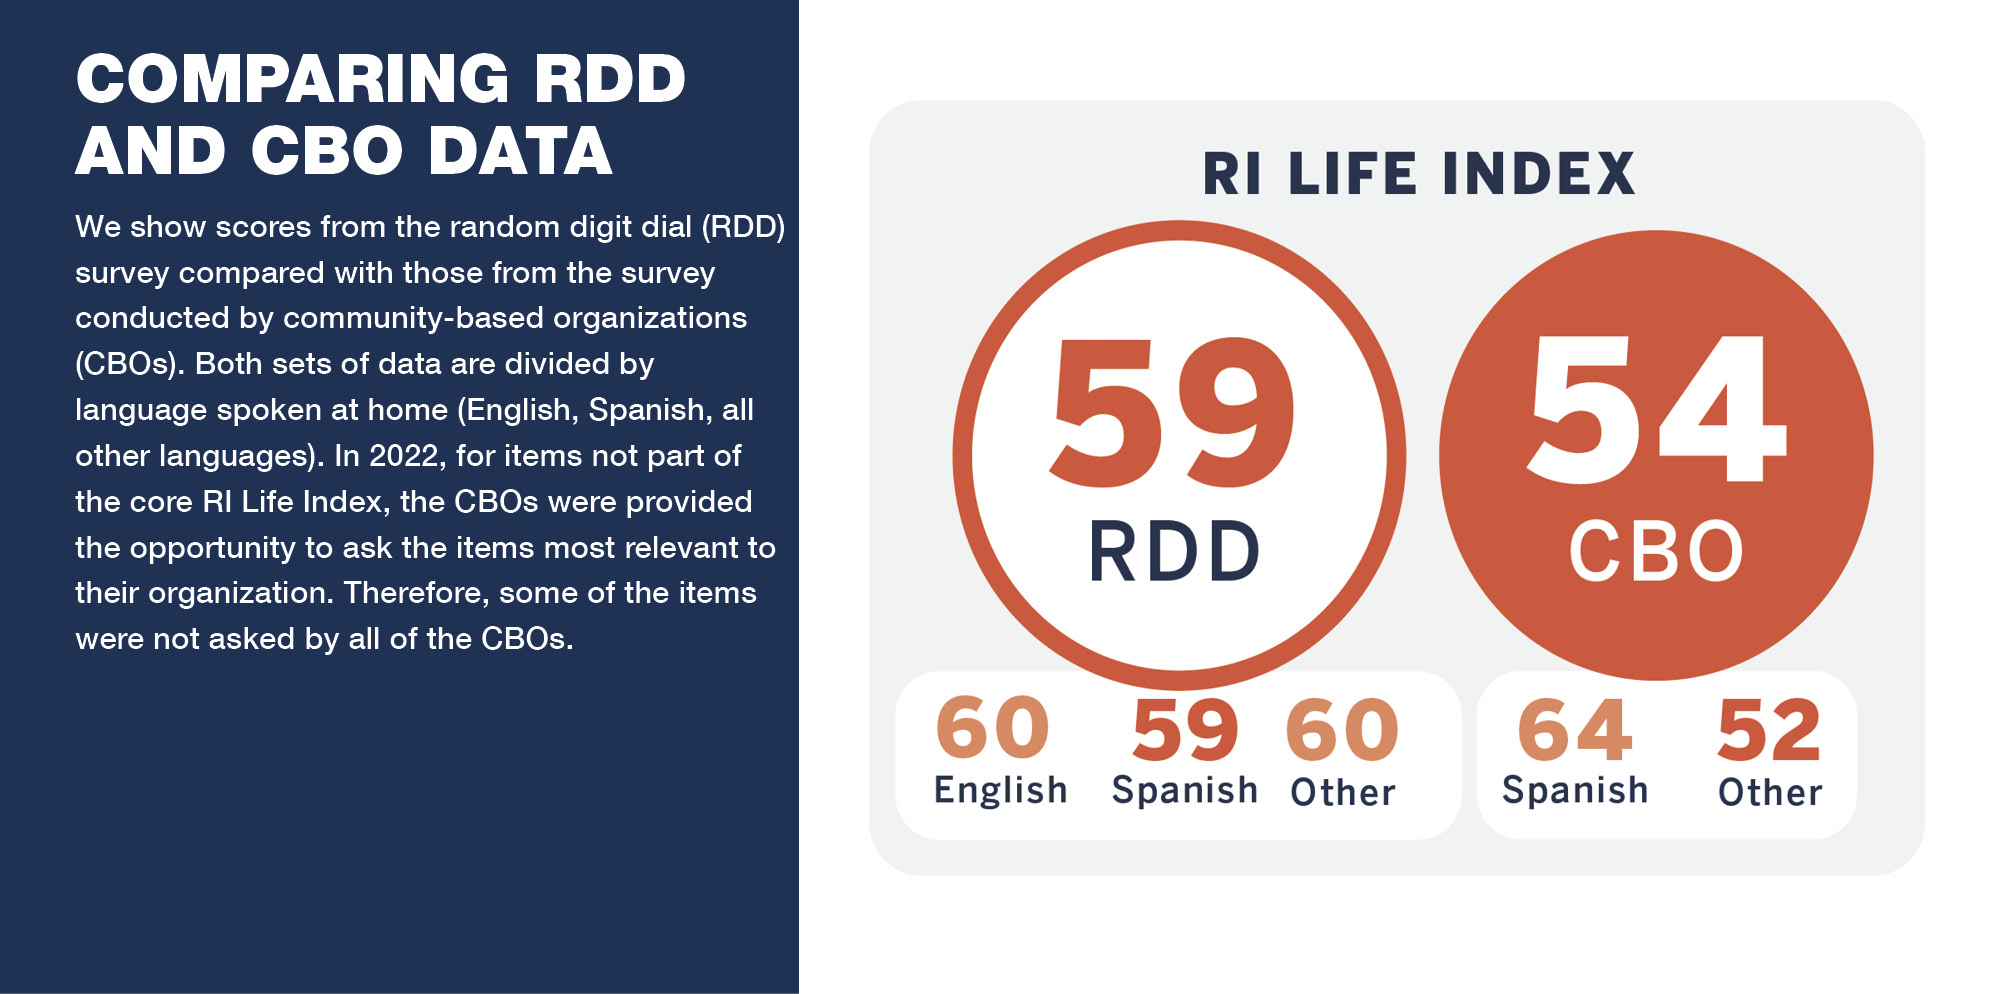 Comparing RDD And CBO Data: We show scores from the random digit dial (RDD) survey compared with those from the survey conducted by community-based organizations (CBOs). Both sets of data are divided by language spoken at home (English, Spanish, all other languages). In 2022, for items not part of the core RI Life Index, the CBOs were provided the opportunity to ask the items most relevant to their organization. Therefore, some of the items were not asked by all of the CBOs.